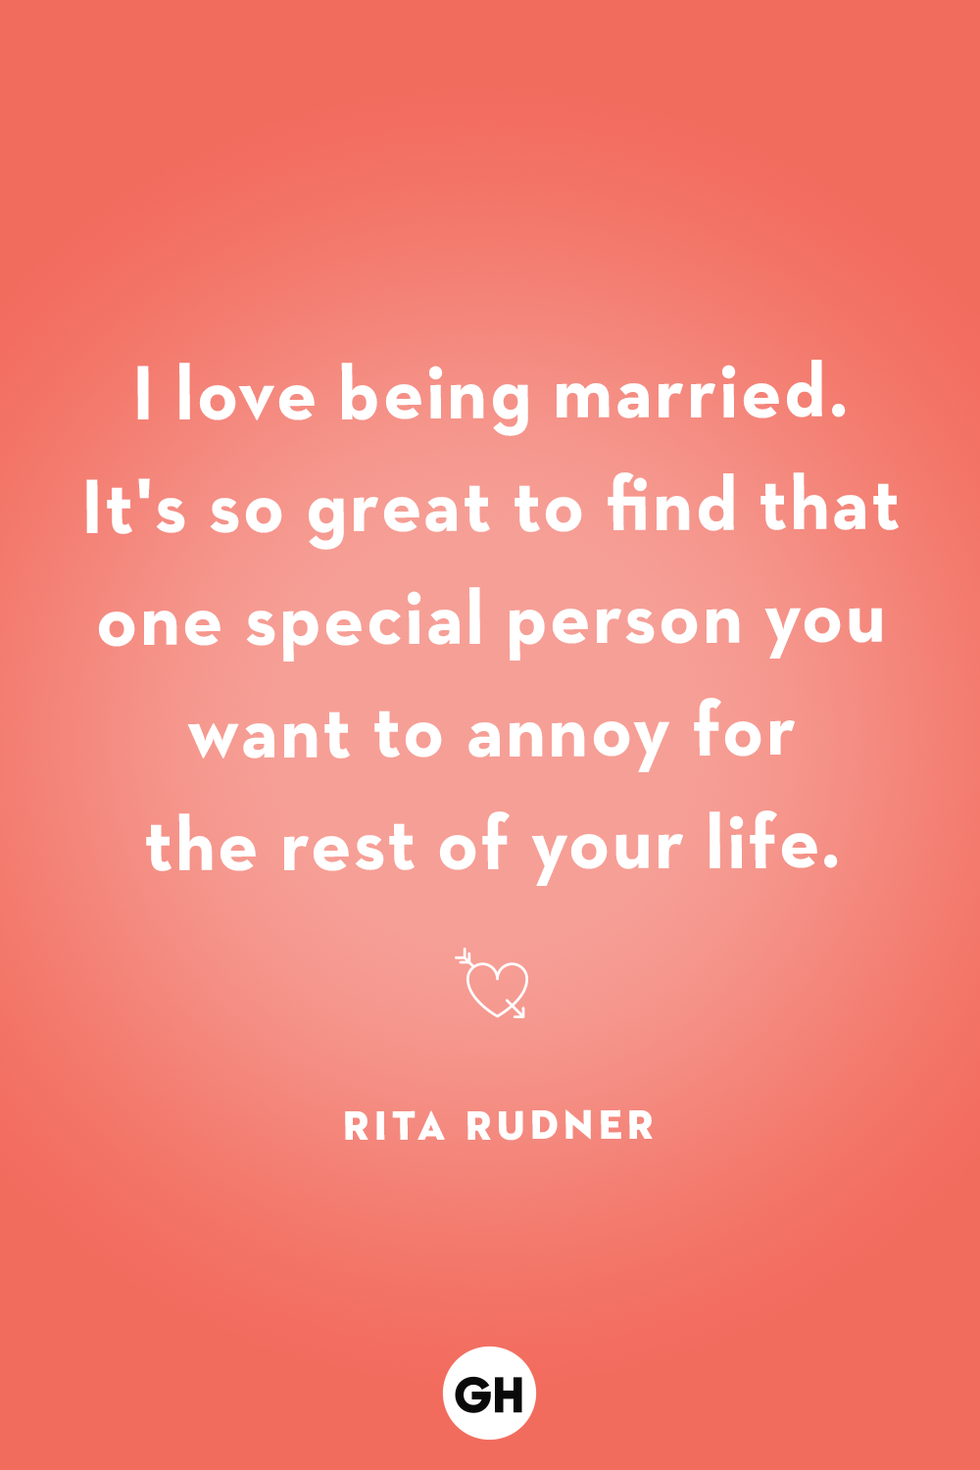 i love being married it's so great to find that one special person you want to annoy for the rest of your life rita rudner